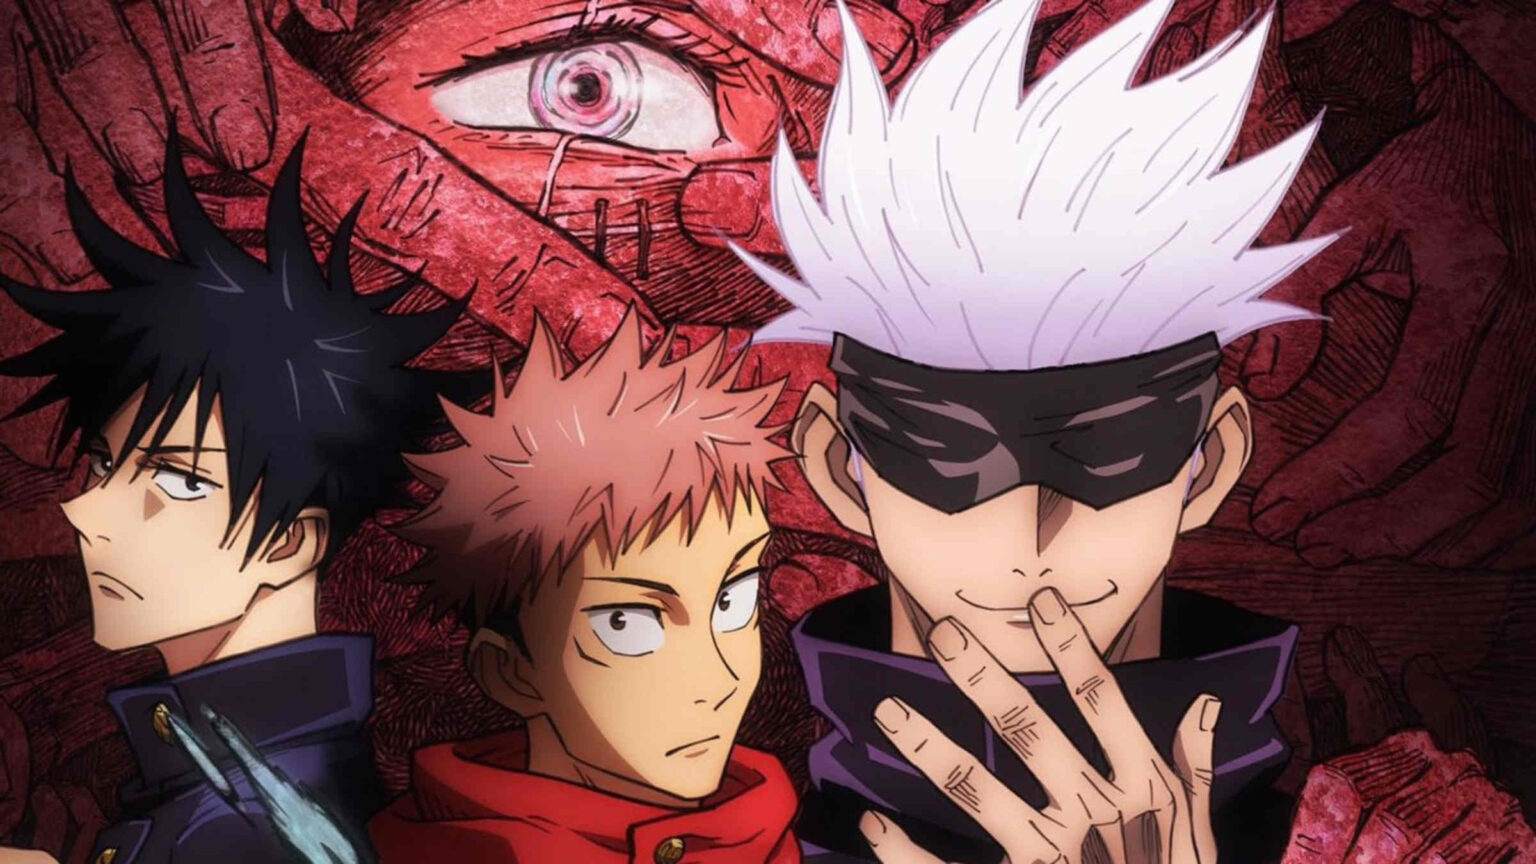 'Jujutsu Kaisen' is Finally here. Find out how to watch Jujutsu Kaisen 0 (2022) full movie online for free.